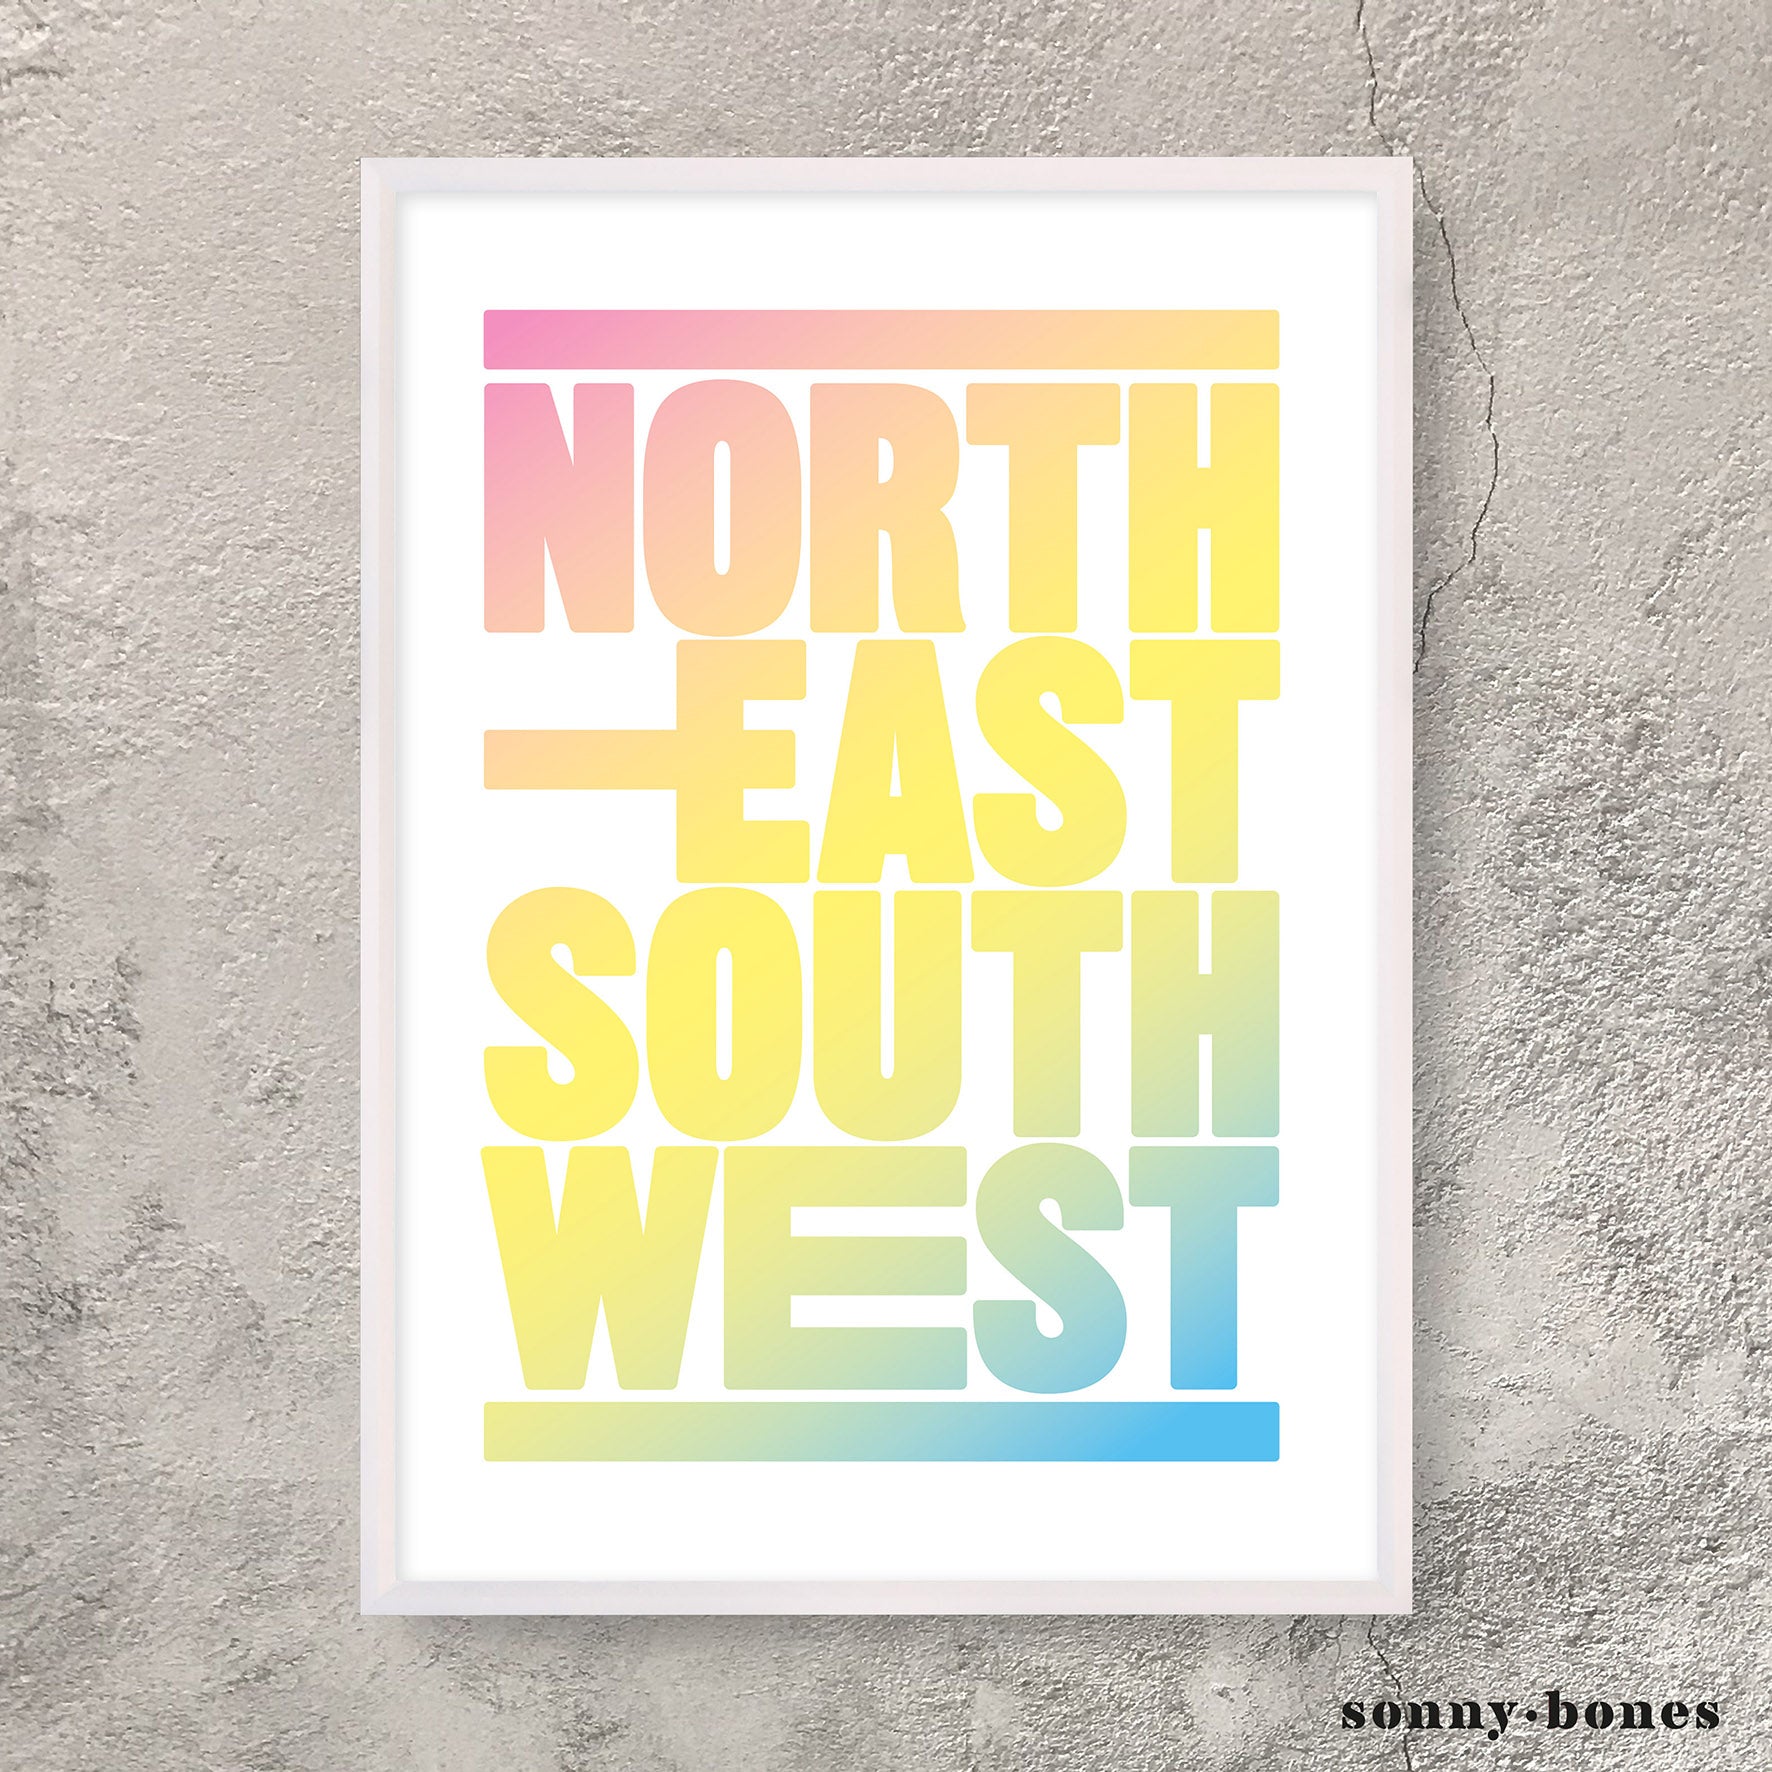 NORTH EAST SOUTH WEST (grad)